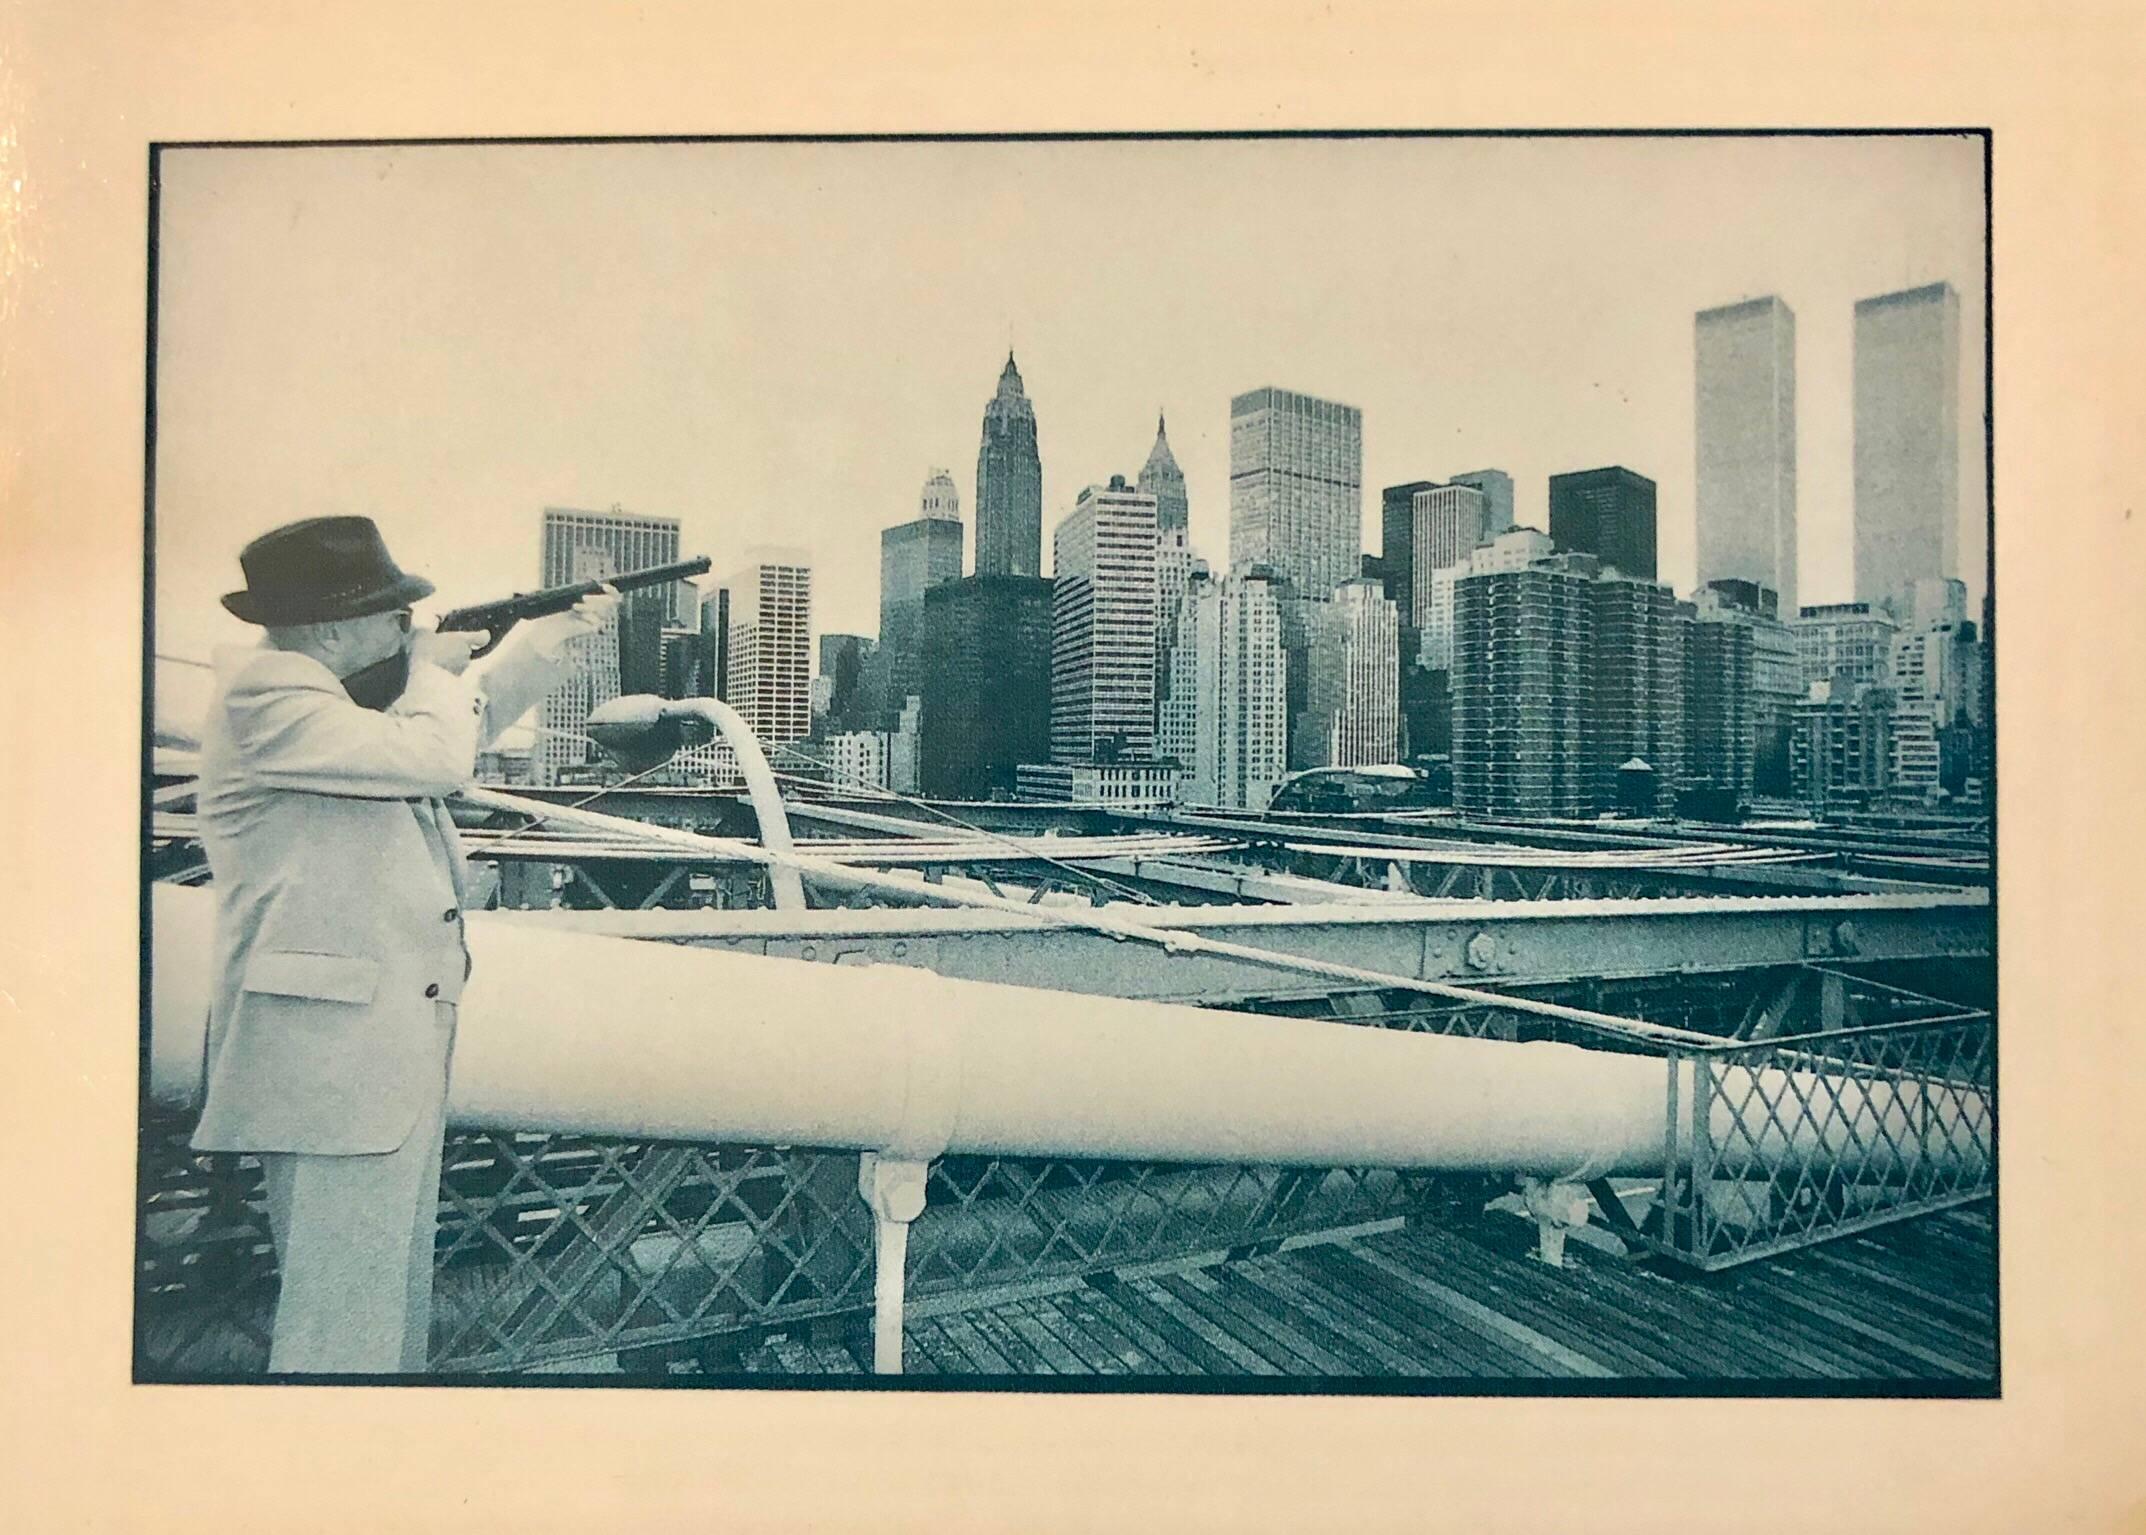 Gerard Malanga Figurative Photograph - Vintage Signed Photograph William Burroughs Aims at Twin Towers from Brooklyn